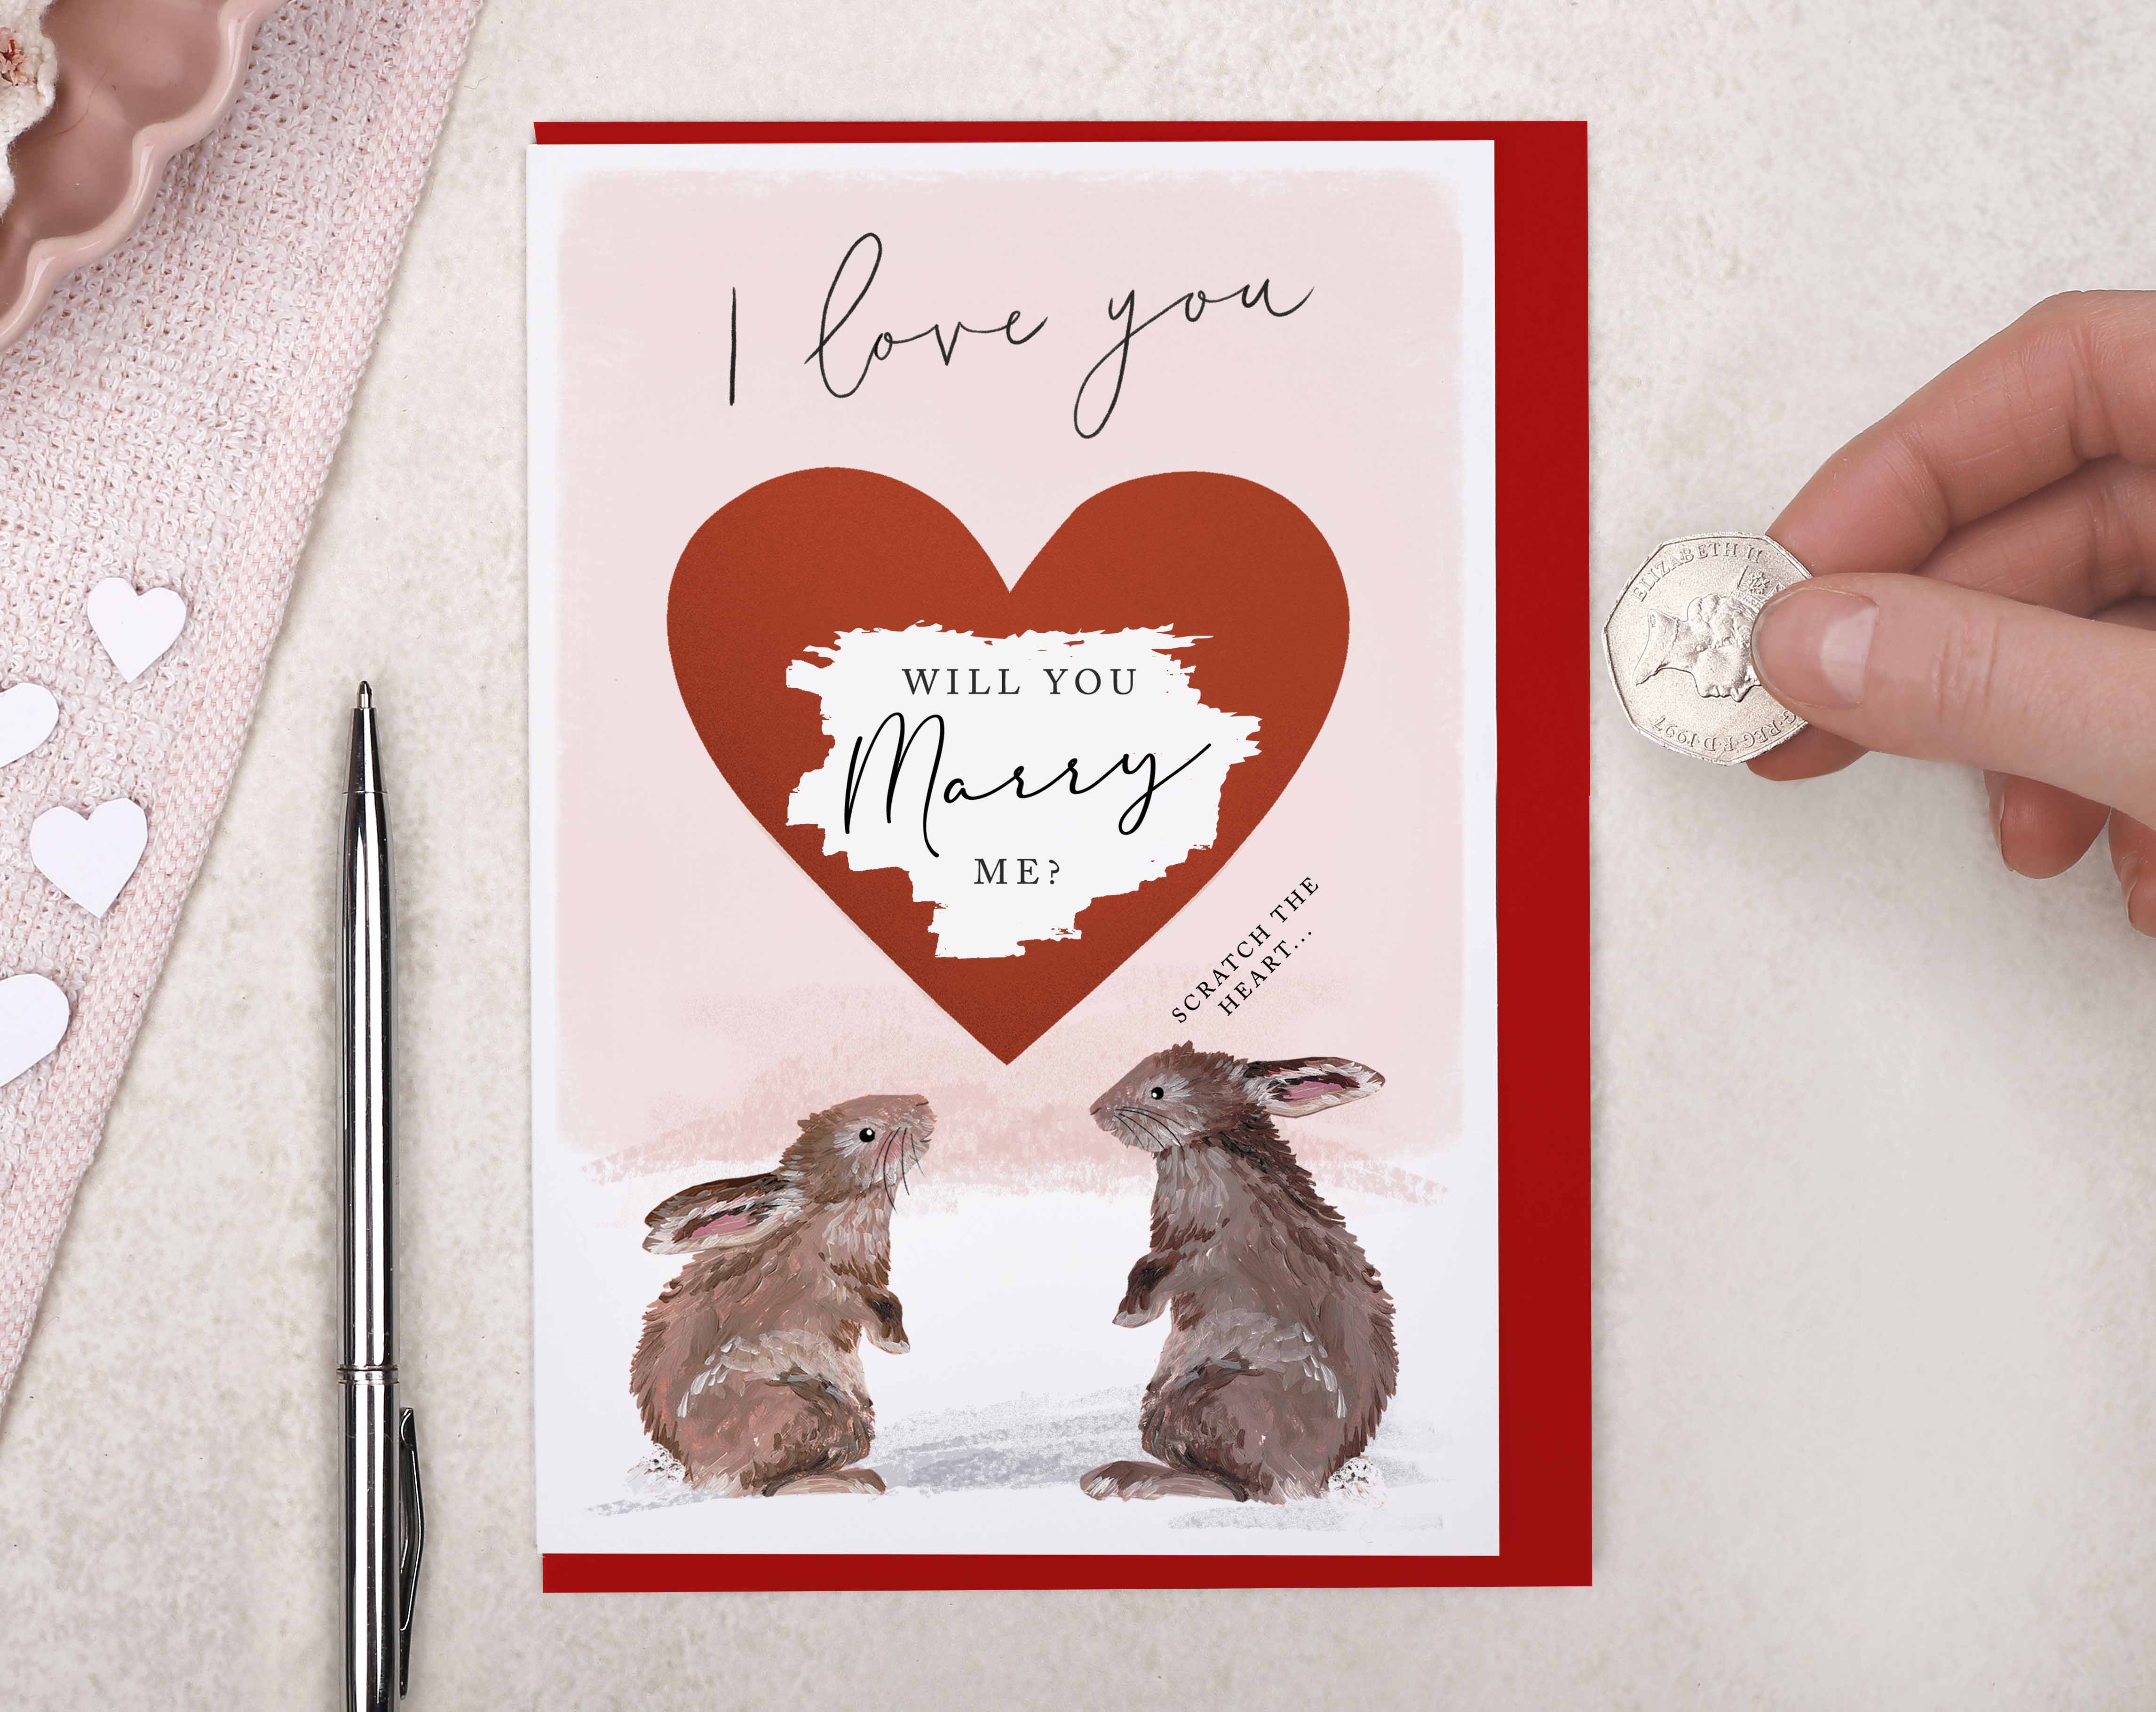 will you marry me' scratch to reveal proposal card